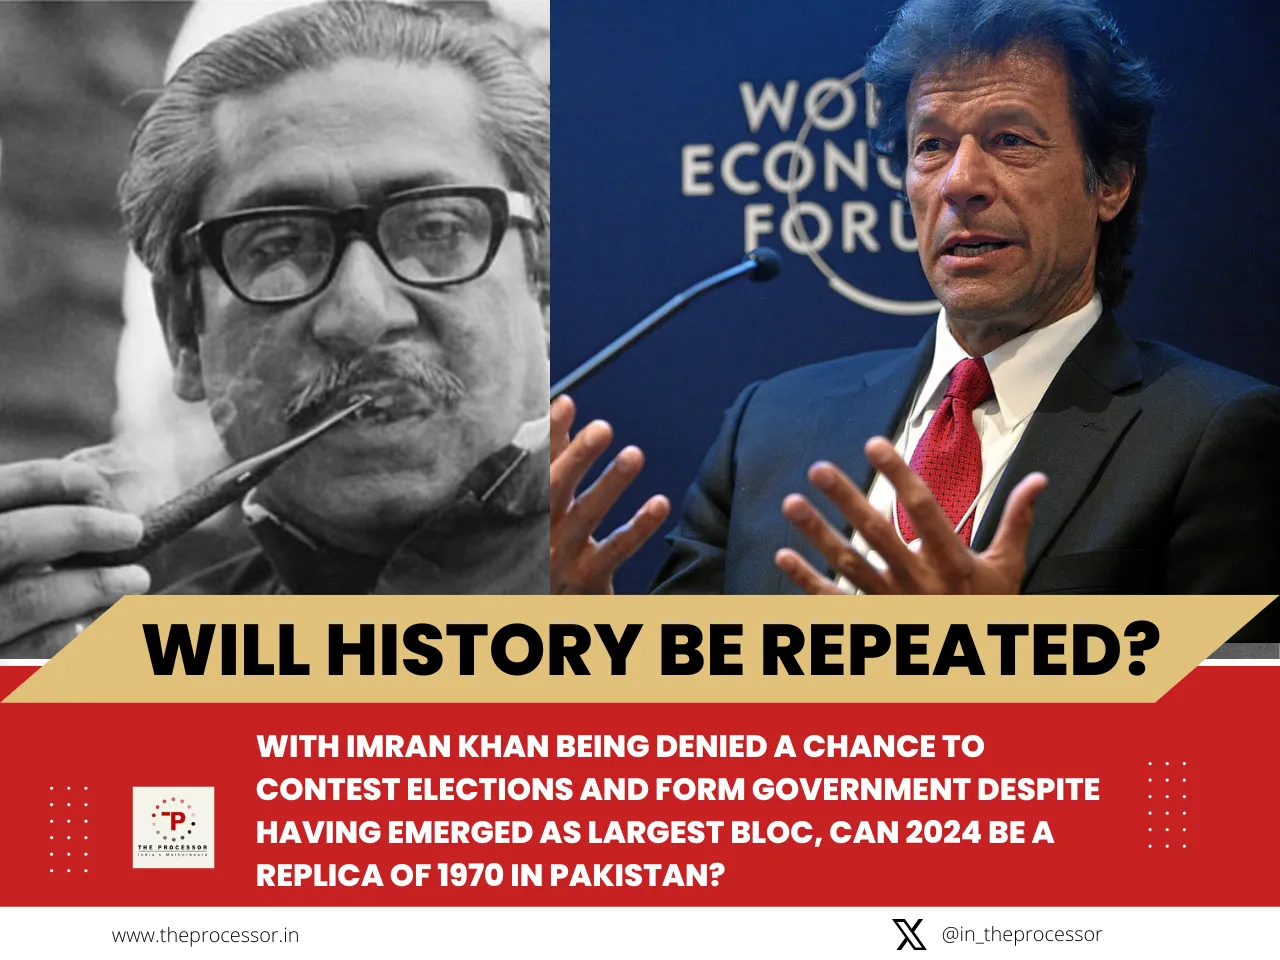 Can 2024 Be A Replica Of 1970 In Pakistan?